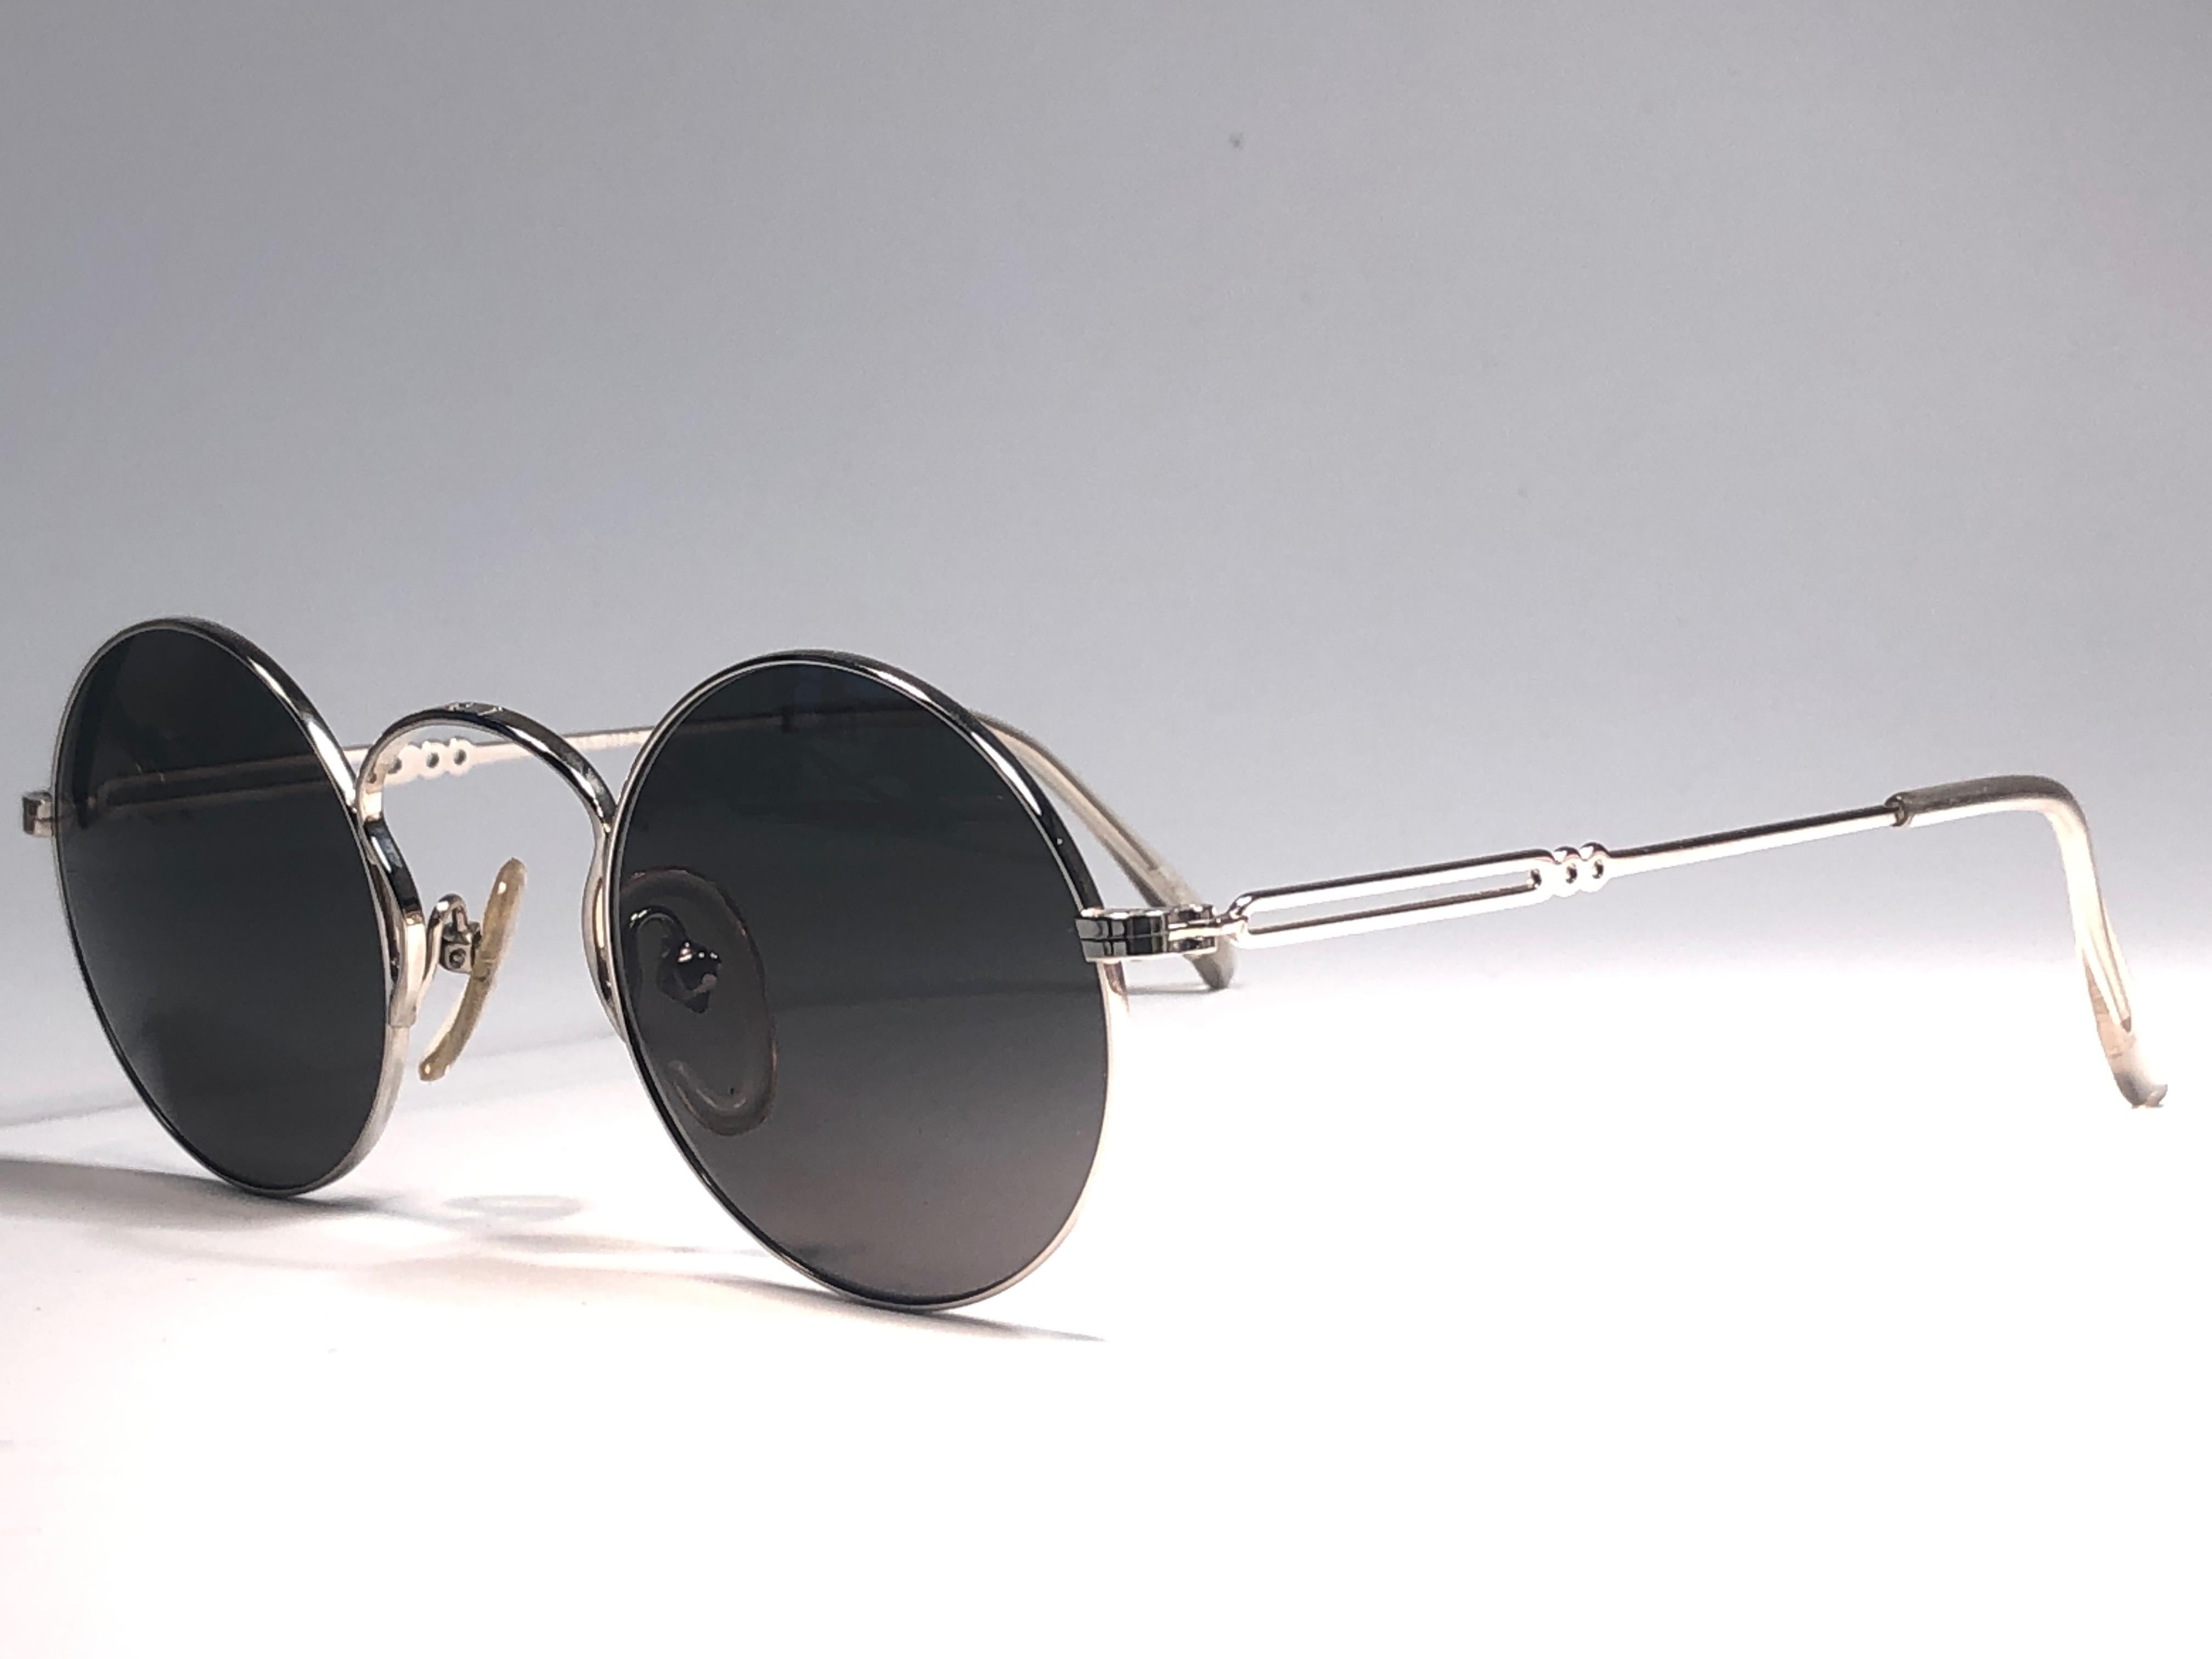 New Jean Paul Gaultier 55 0172 Oval Silver Sunglasses 1990's Made in Japan  5